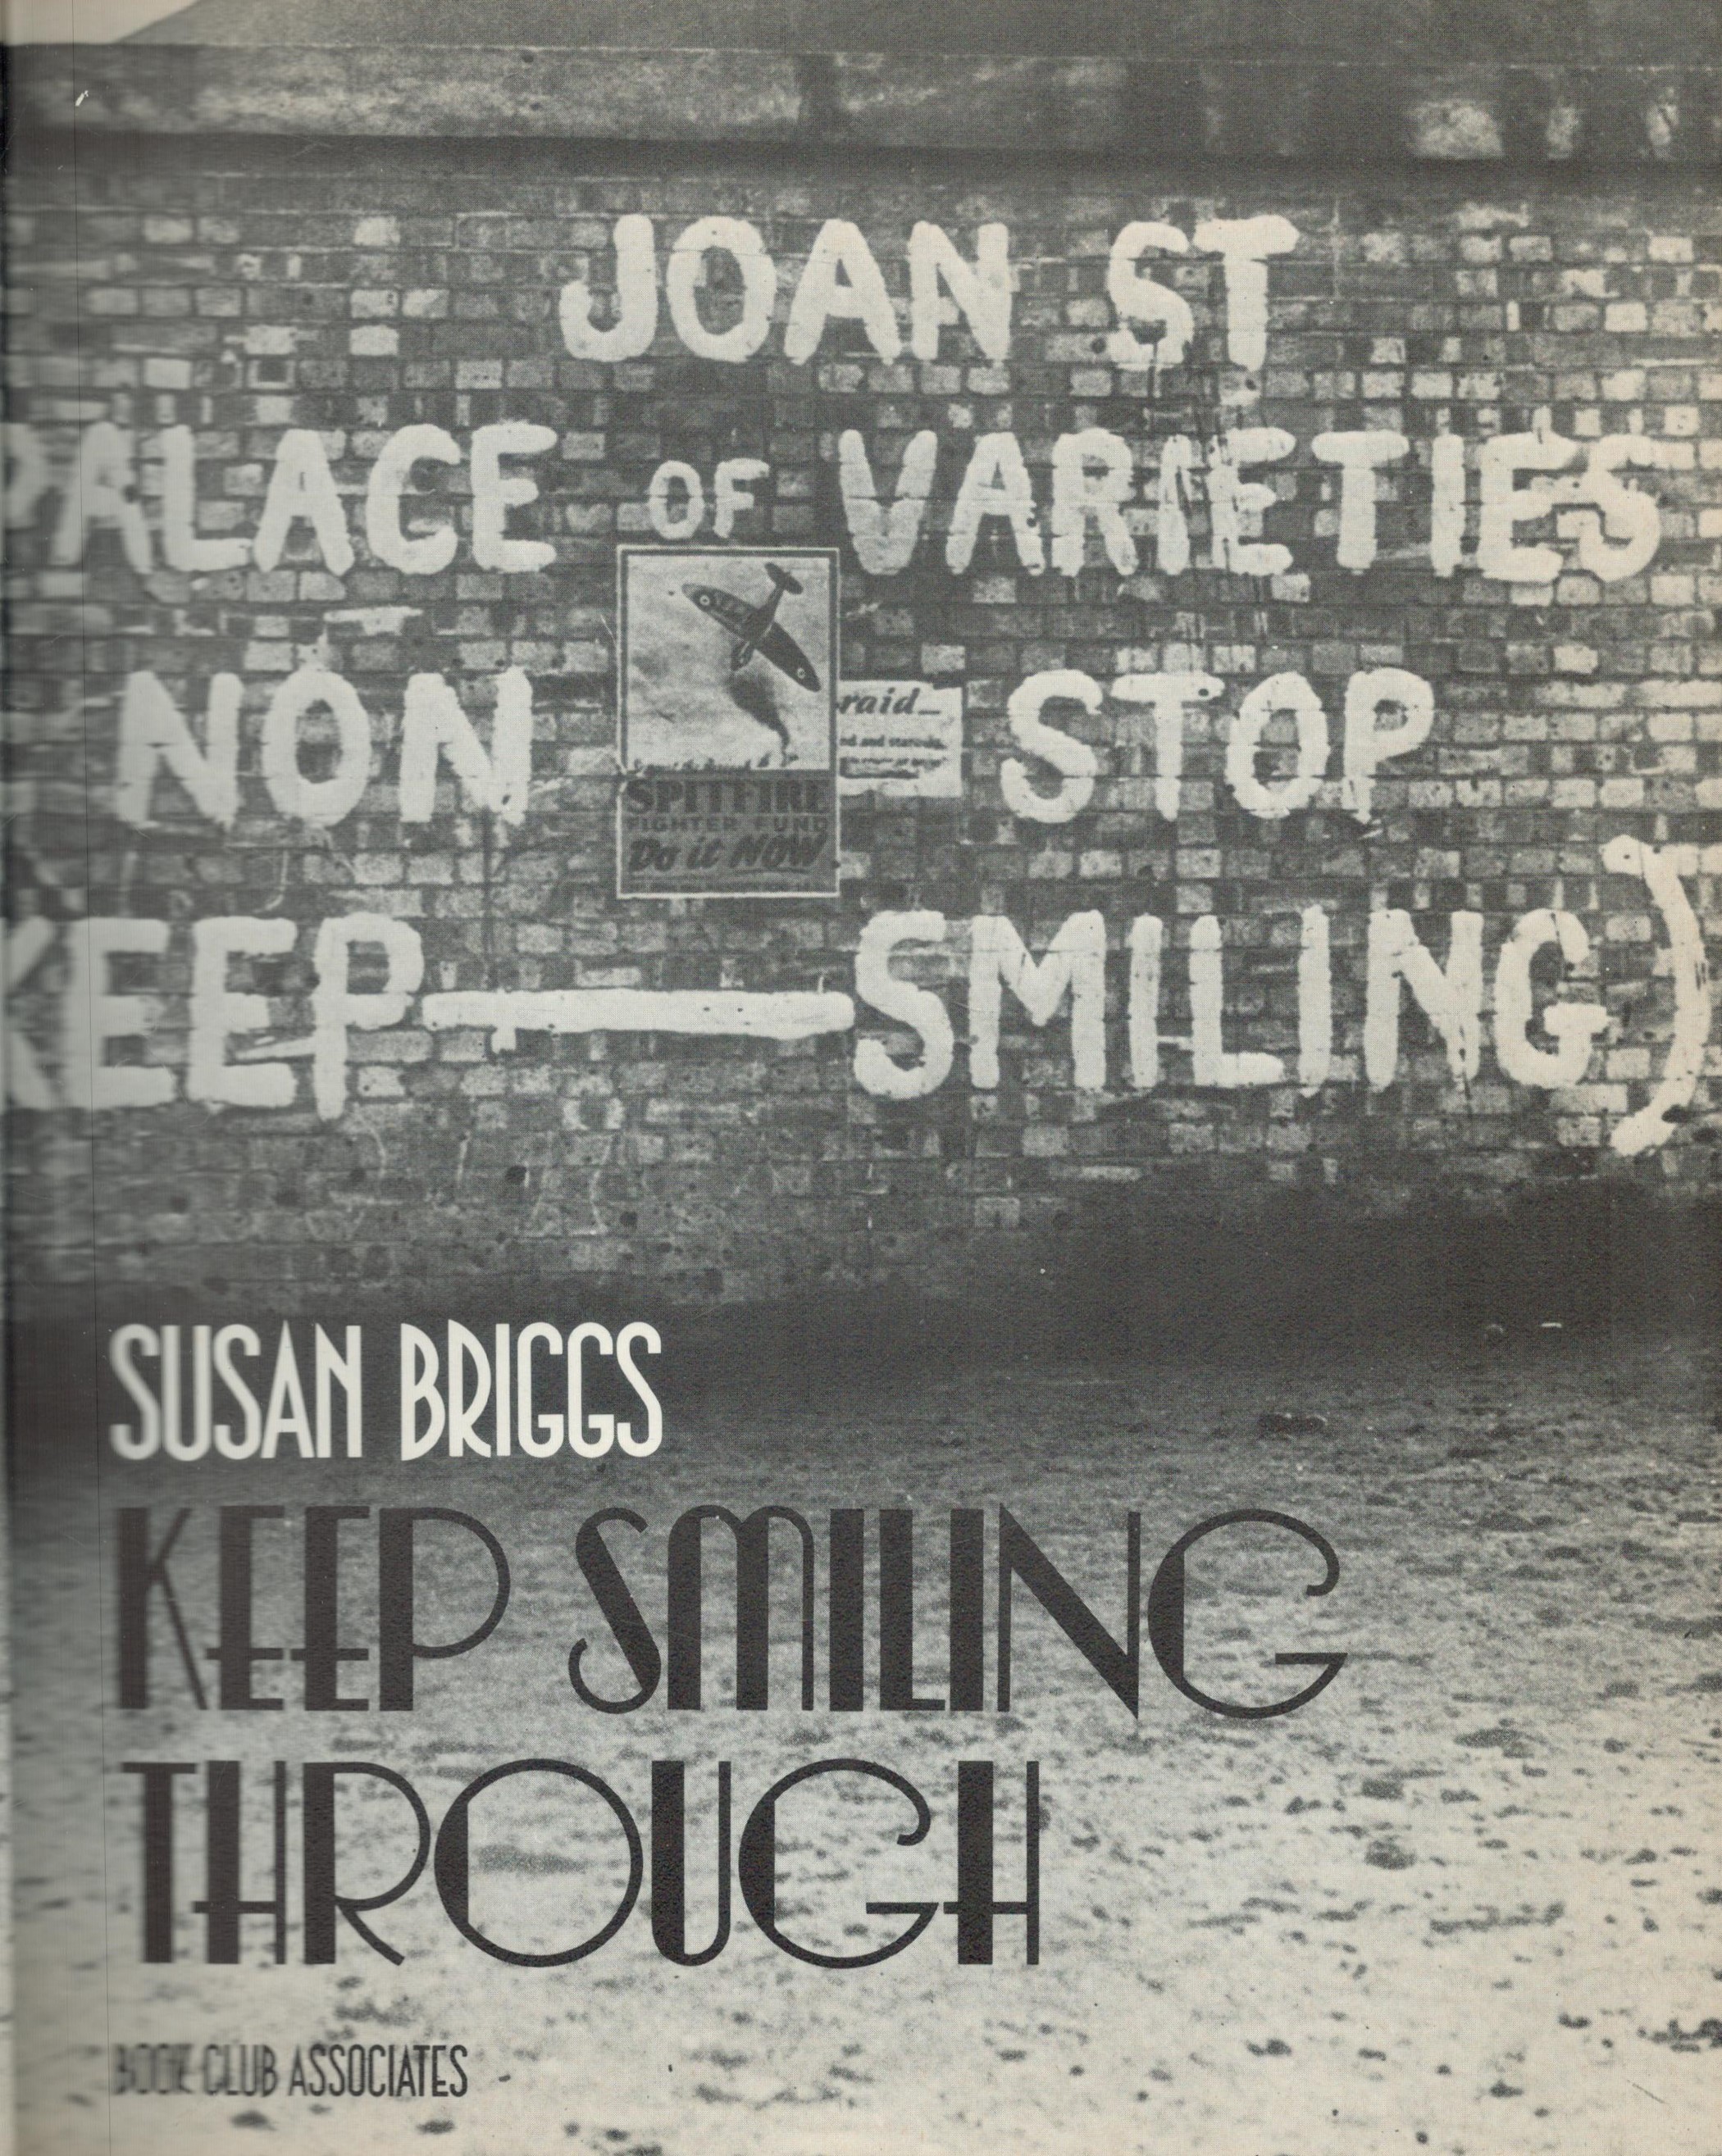 Keep Smiling Through - The Home Front 1939 - 45 by Susan Briggs 1975 Book Club Edition Hardback book - Image 2 of 3